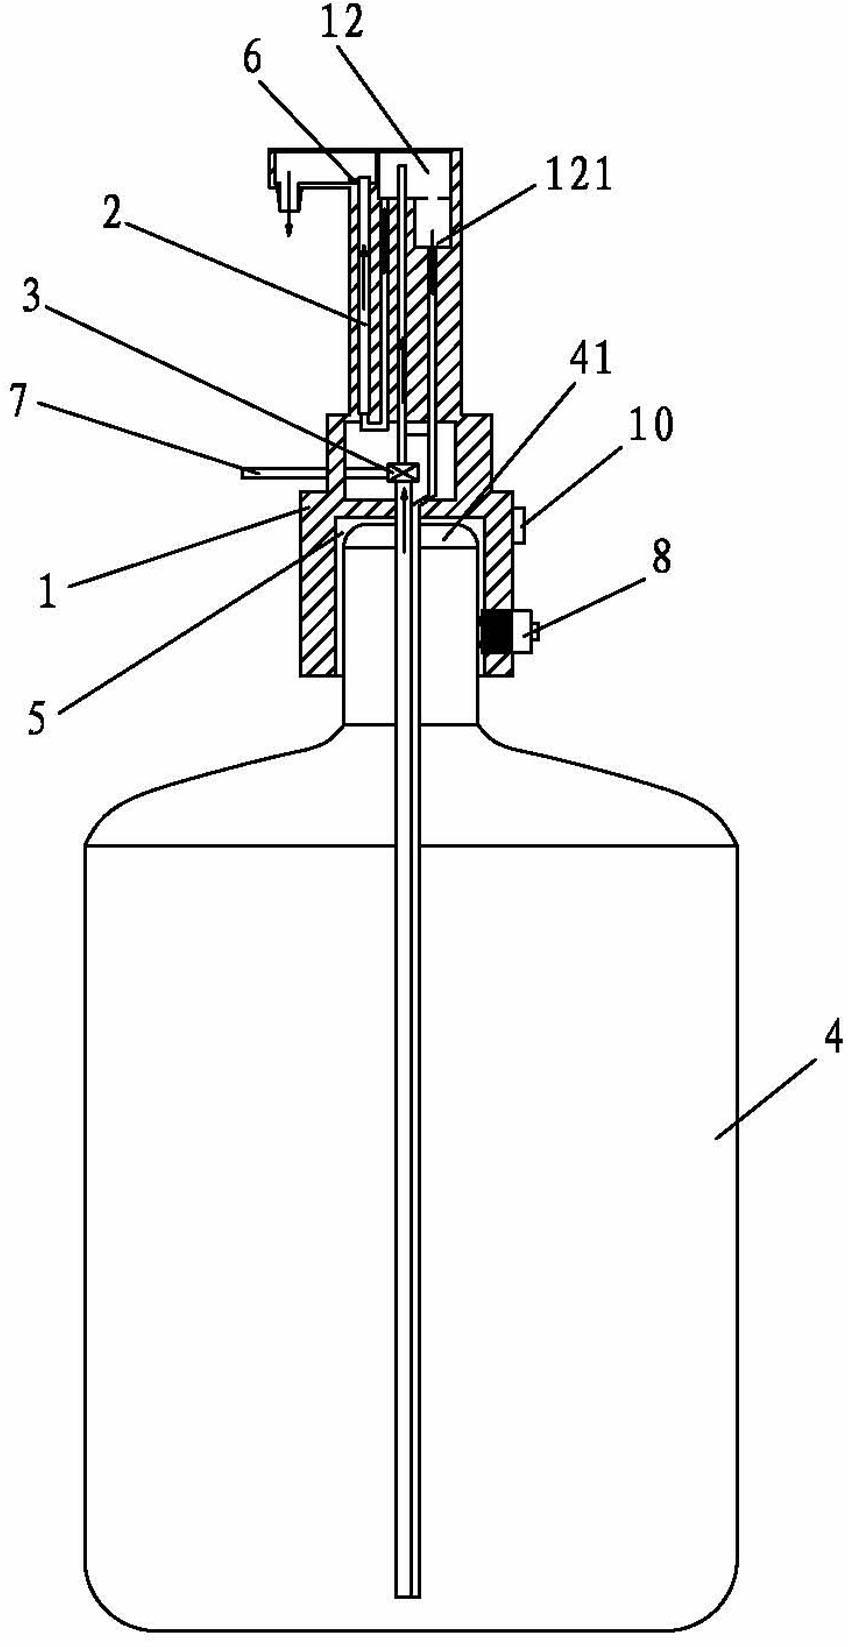 Heating device connected onto water outflow nozzle for barreled water